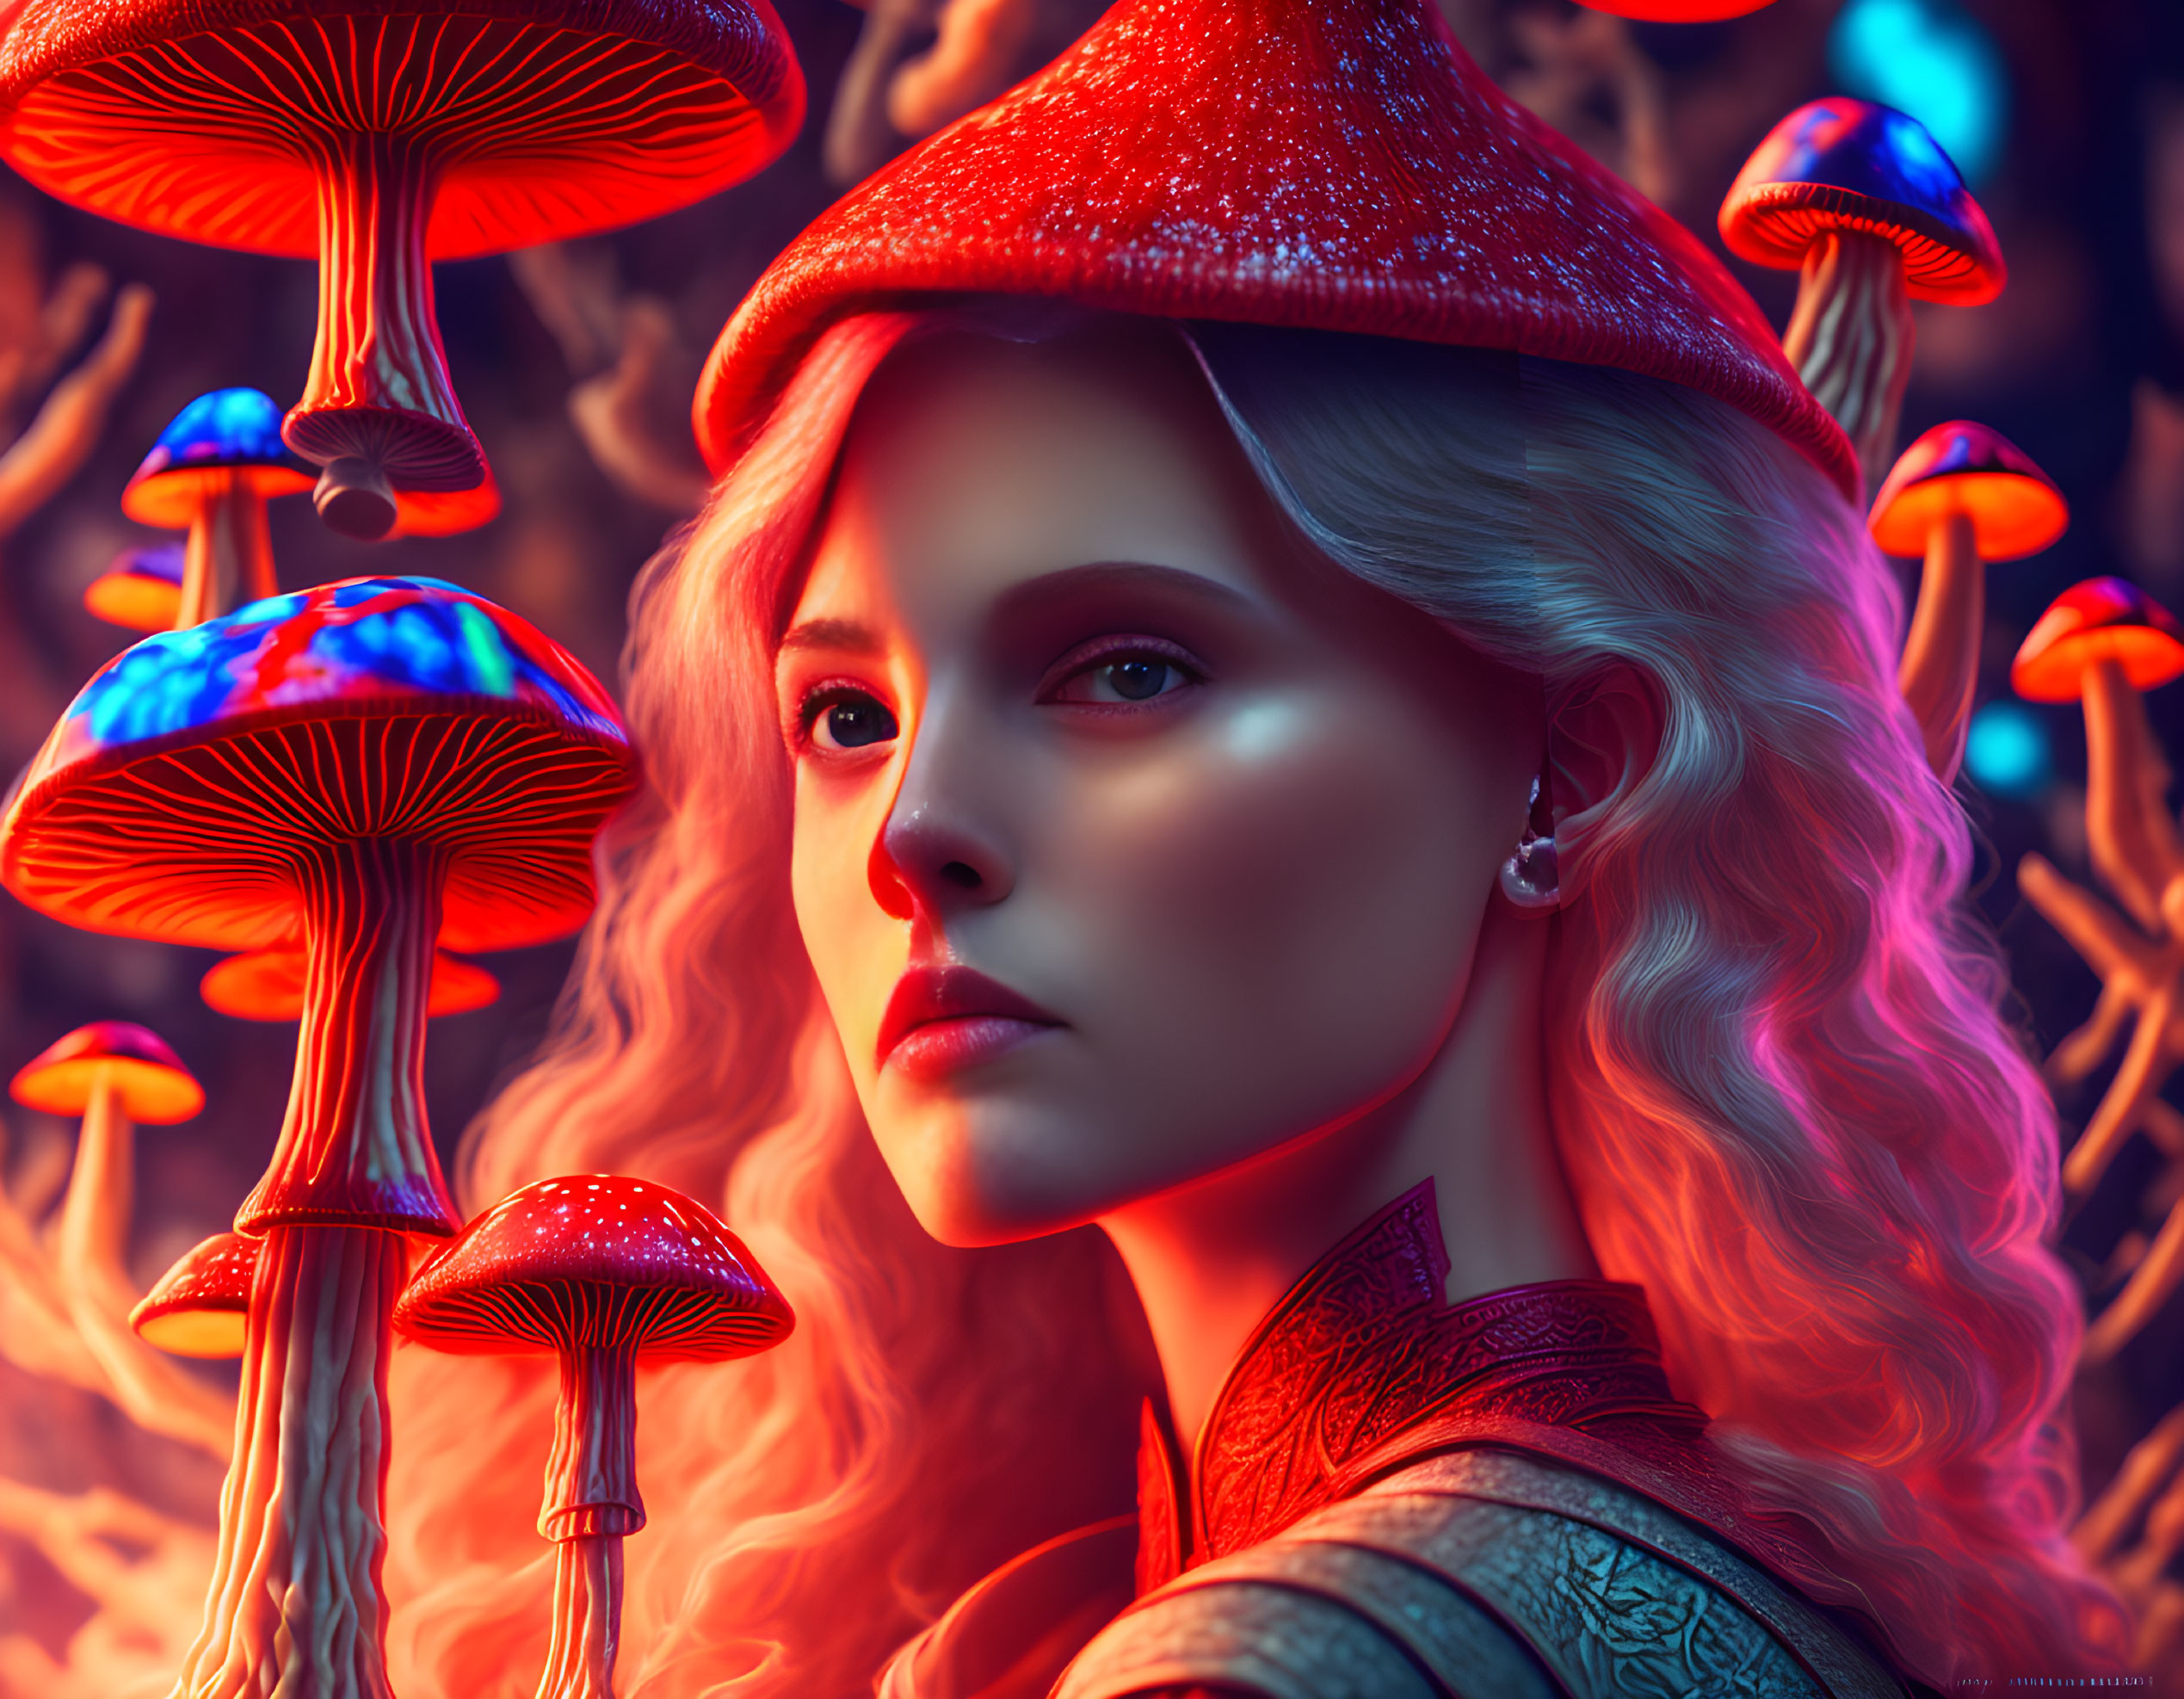 Digital artwork: Glowing woman with neon mushrooms in enchanted forest